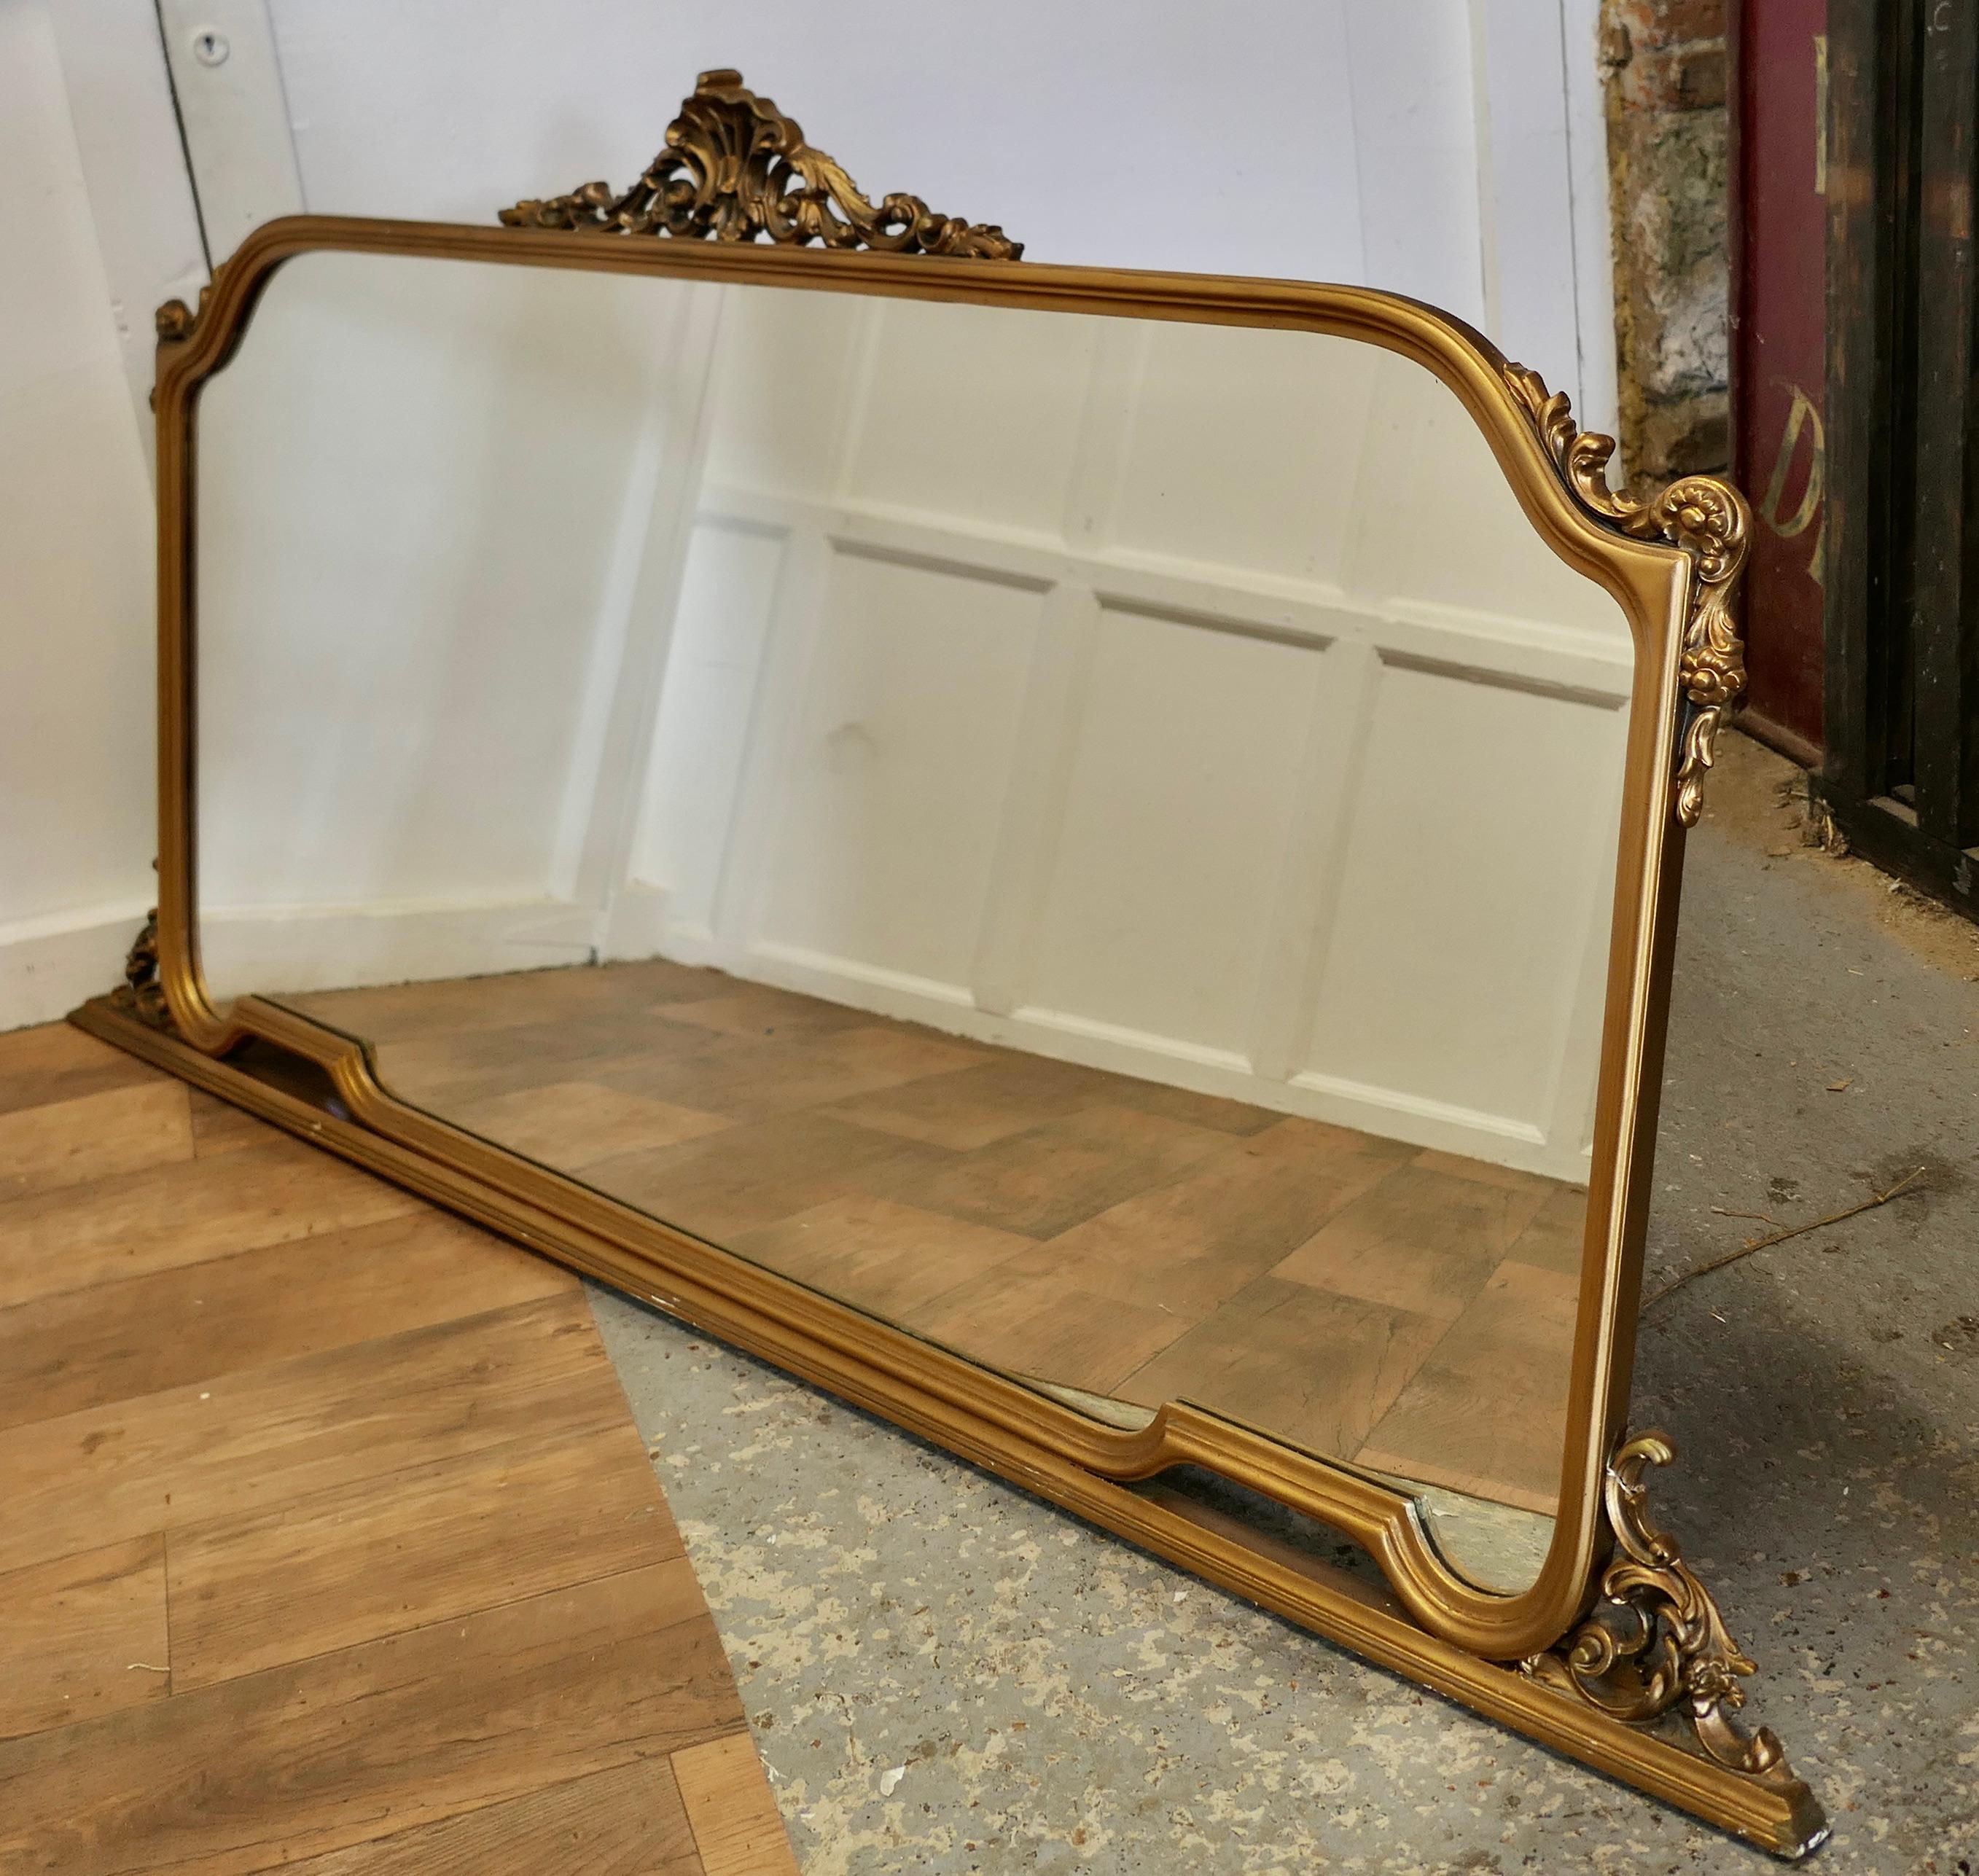 A Large Gilt Over Mantle Mirror  

This Mirror has a beautiful Gold Frame it is decorated with swags on the top and around the edges
 The large frame is in good sound condition, the looking glass too is in excellent condition
This is a charming